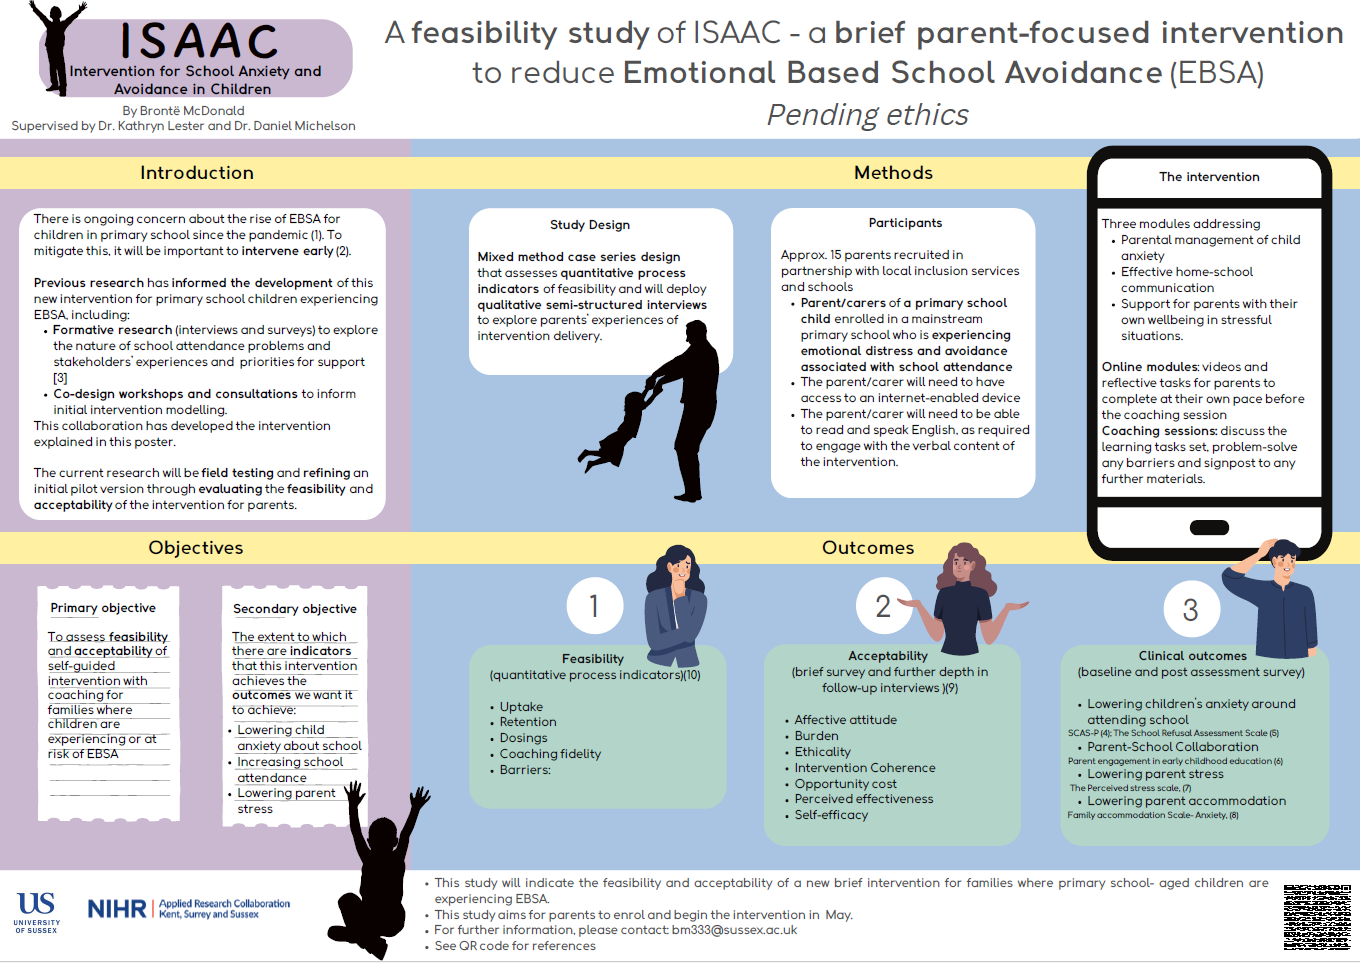 A feasibility study of ISAAC - a brief parent-focused intervention to reduce Emotional Based School Avoidance, Brontë McDonald Thumbnail